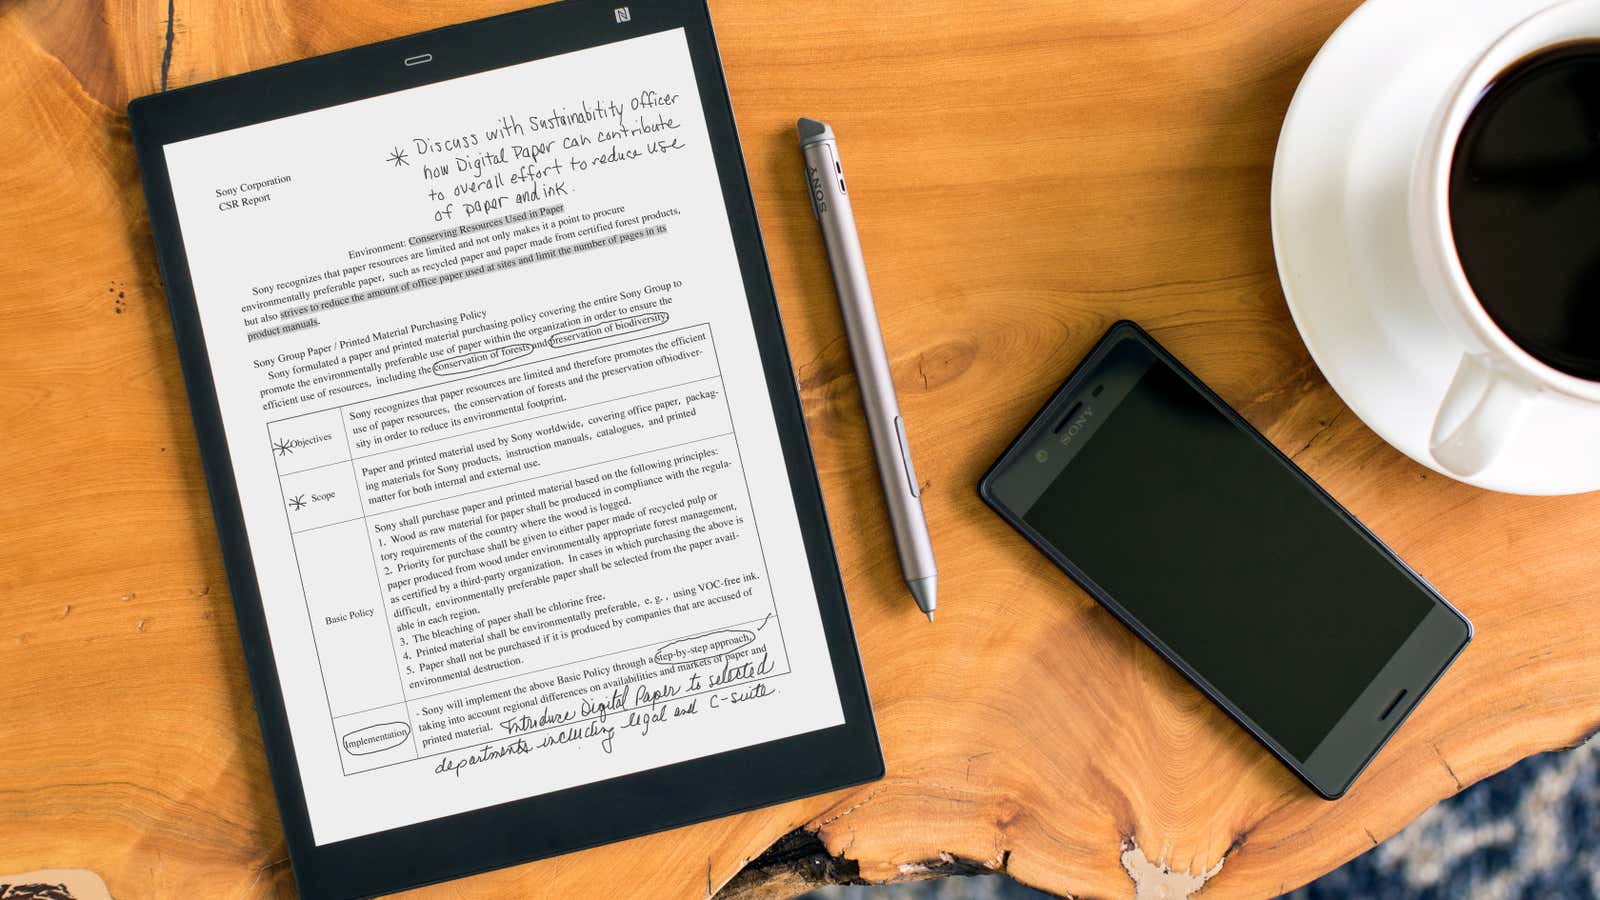 Sony introduces the DPT-CP1 digital paper tablet—does it do enough